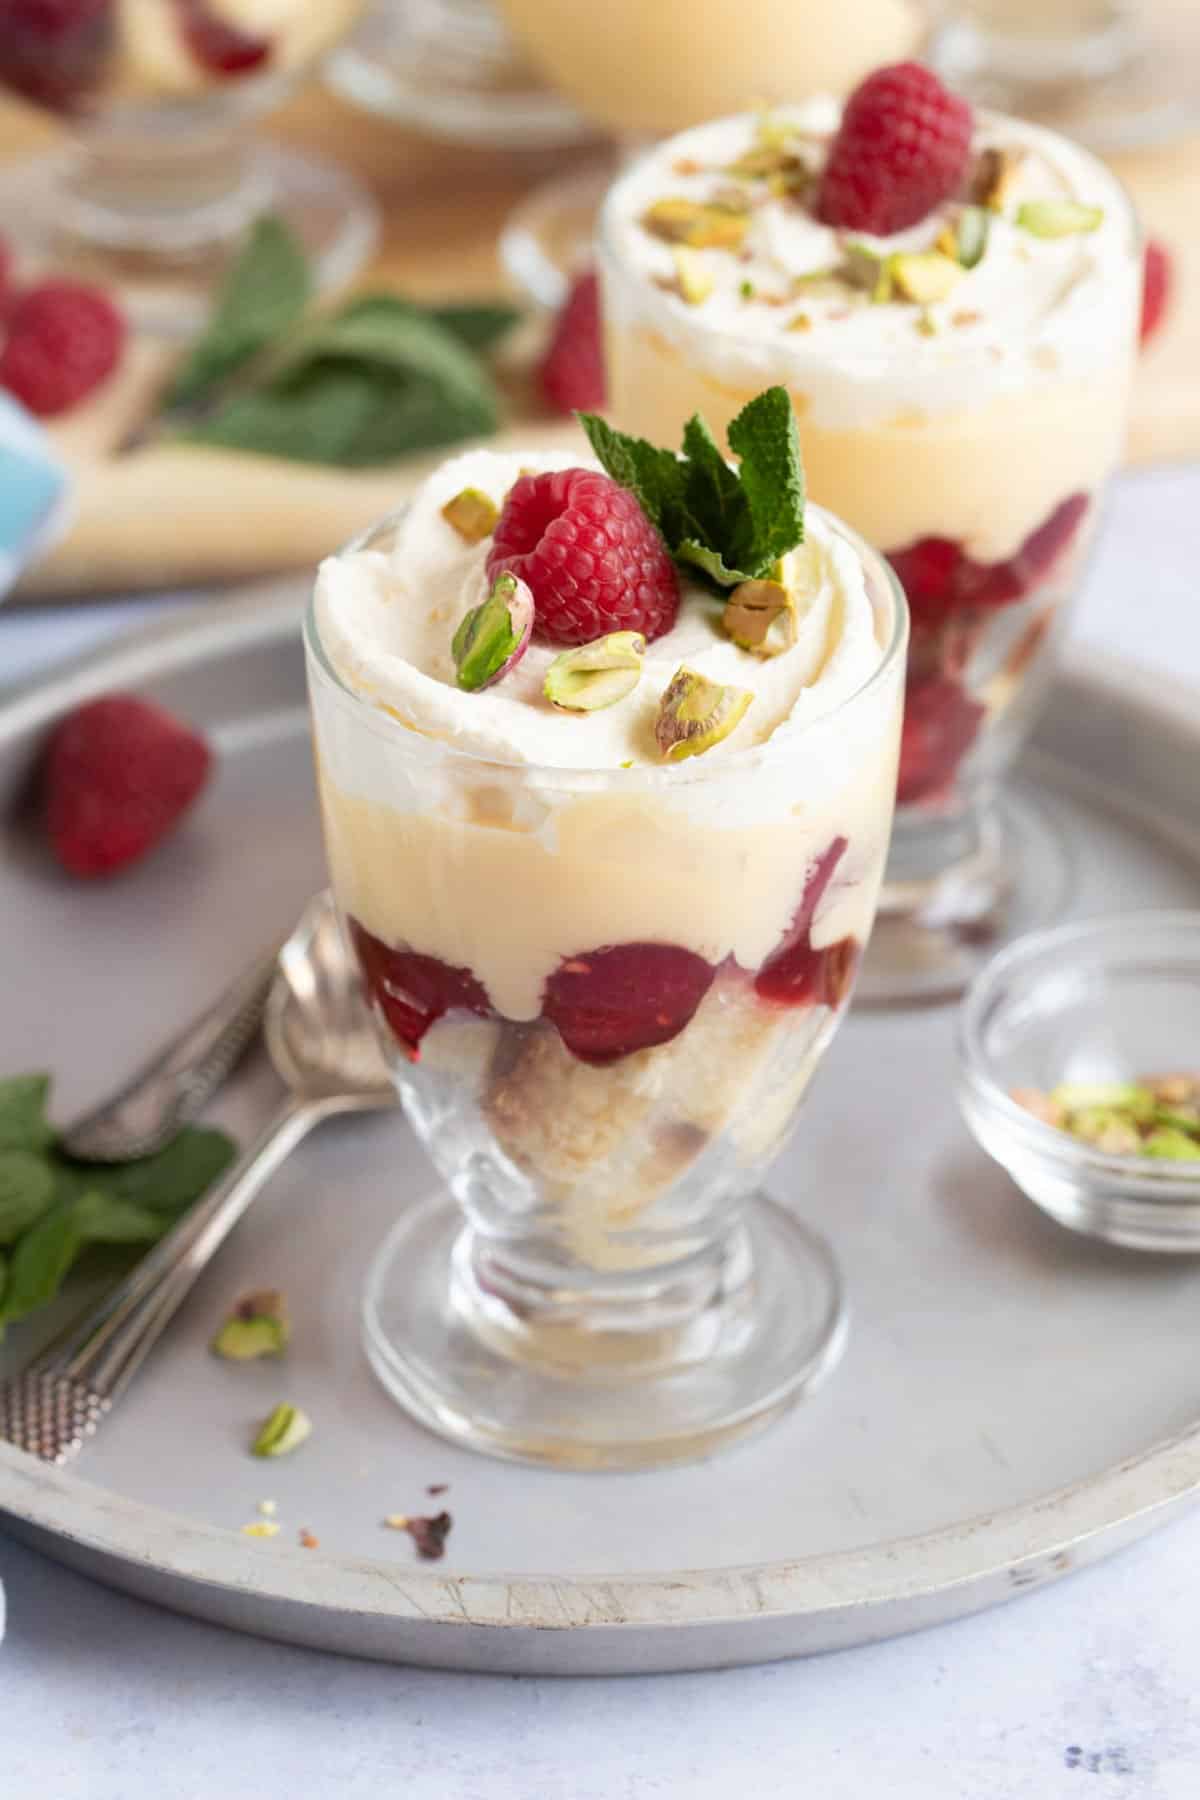 Sherry trifles topped with fresh raspberries.